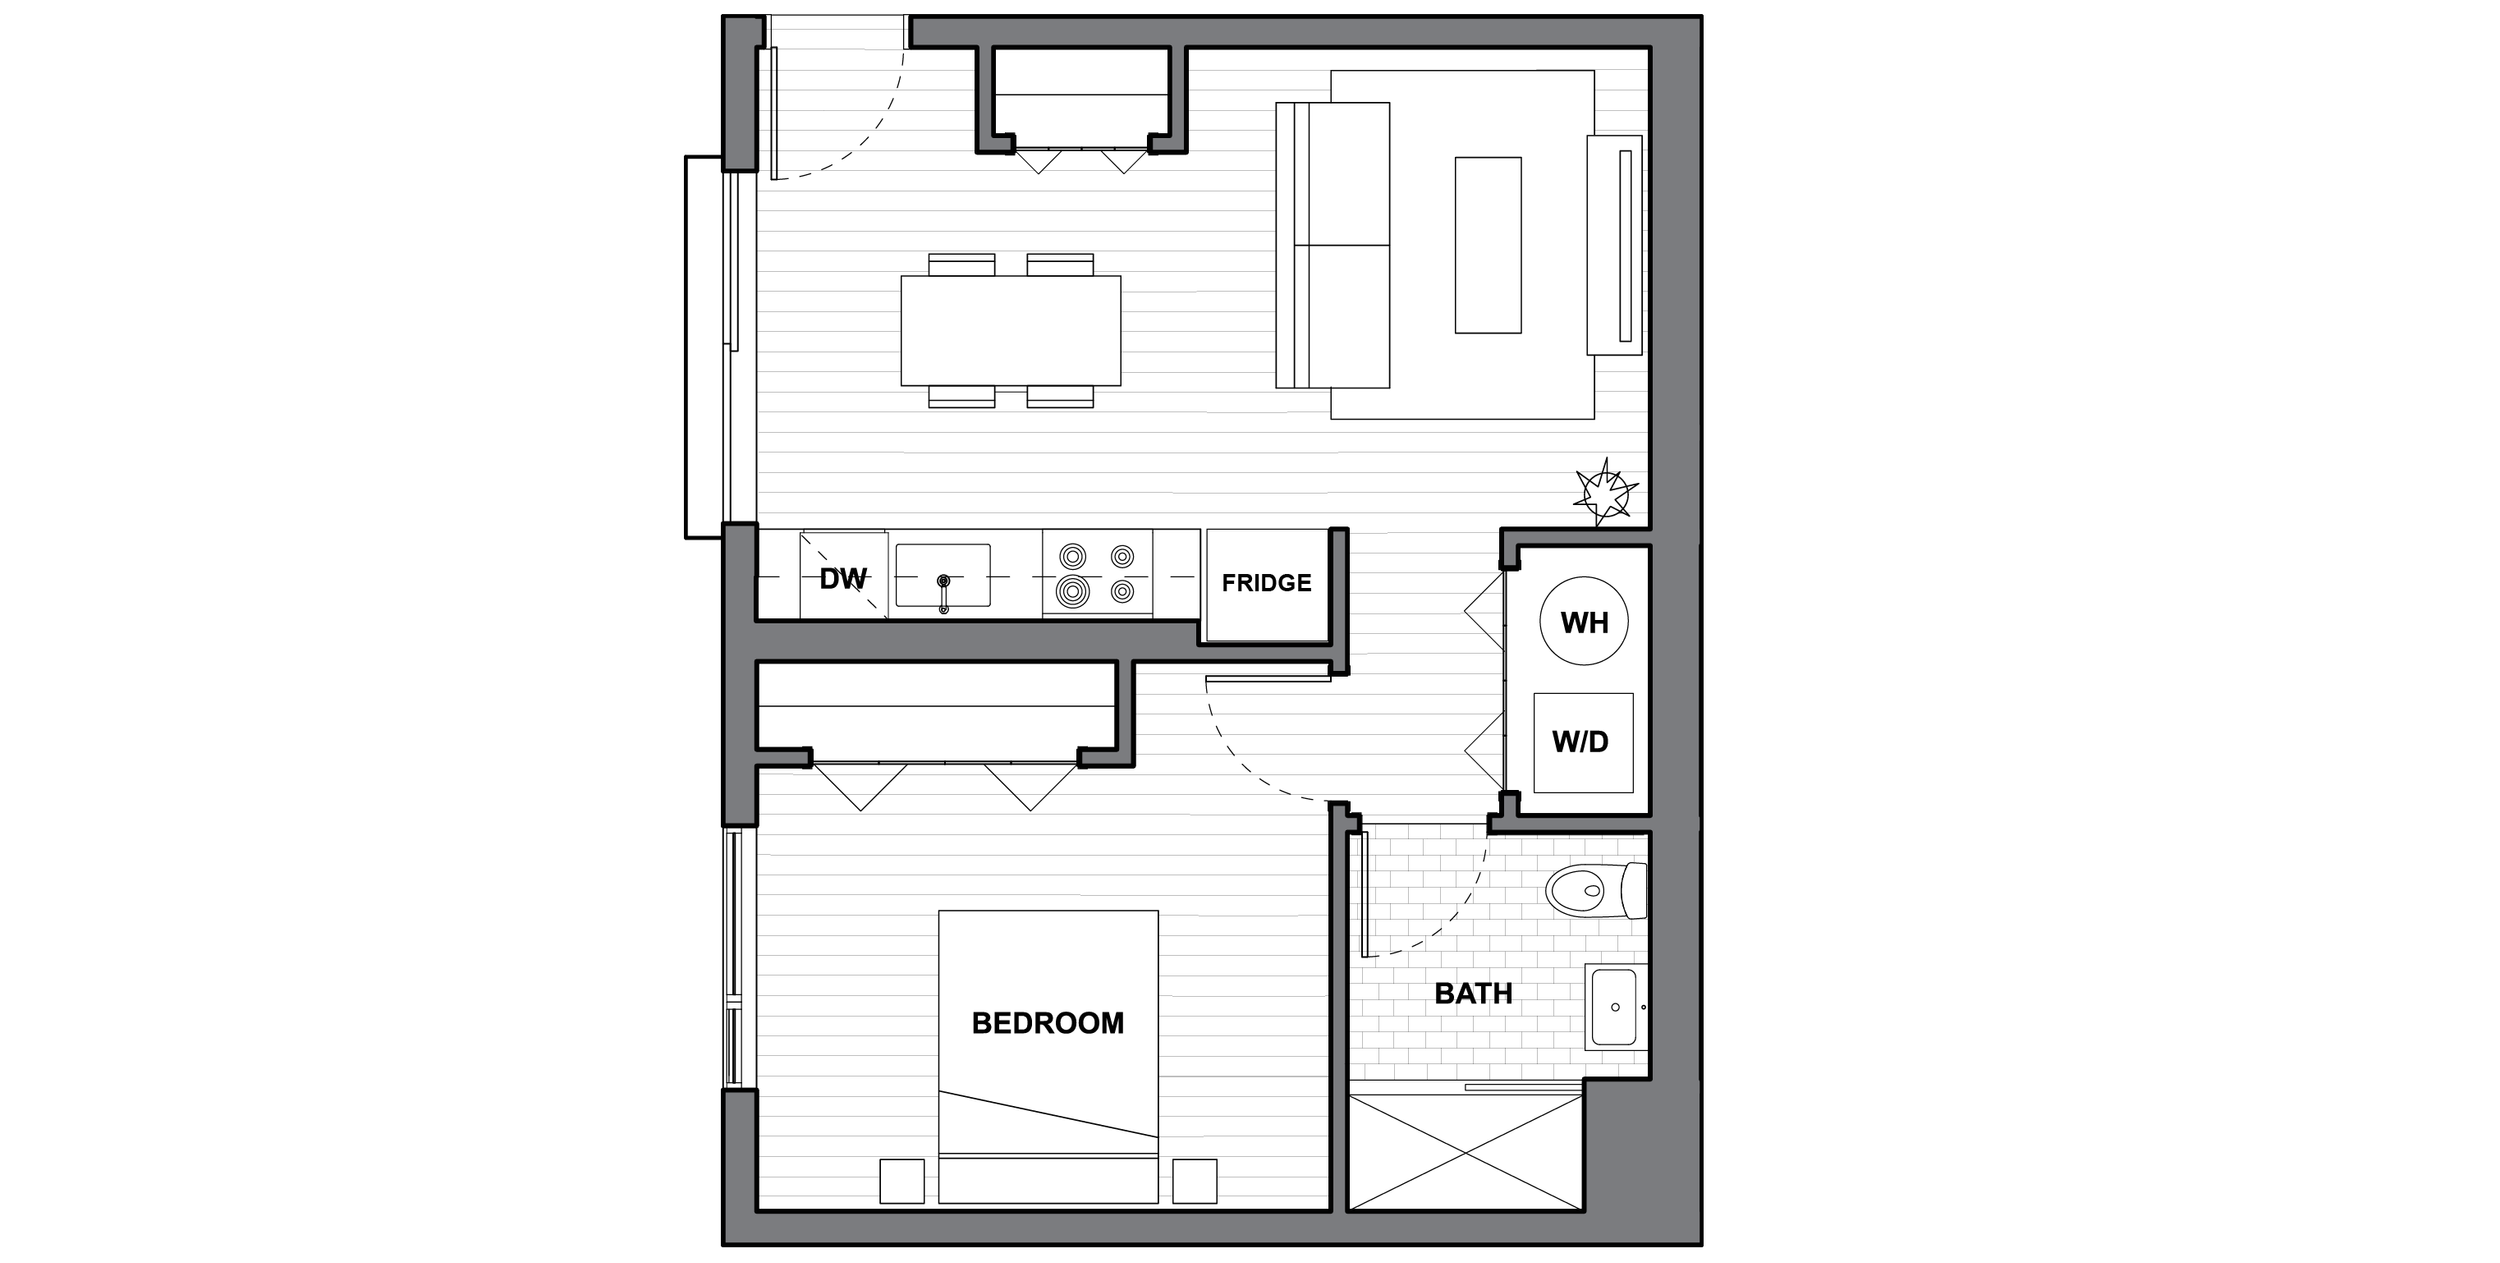   UNIT PH403  1 BEDROOM / 1 BATH 603 SQUARE FEET   REQUEST INFORMATION / APPLY FOR THIS UNIT   